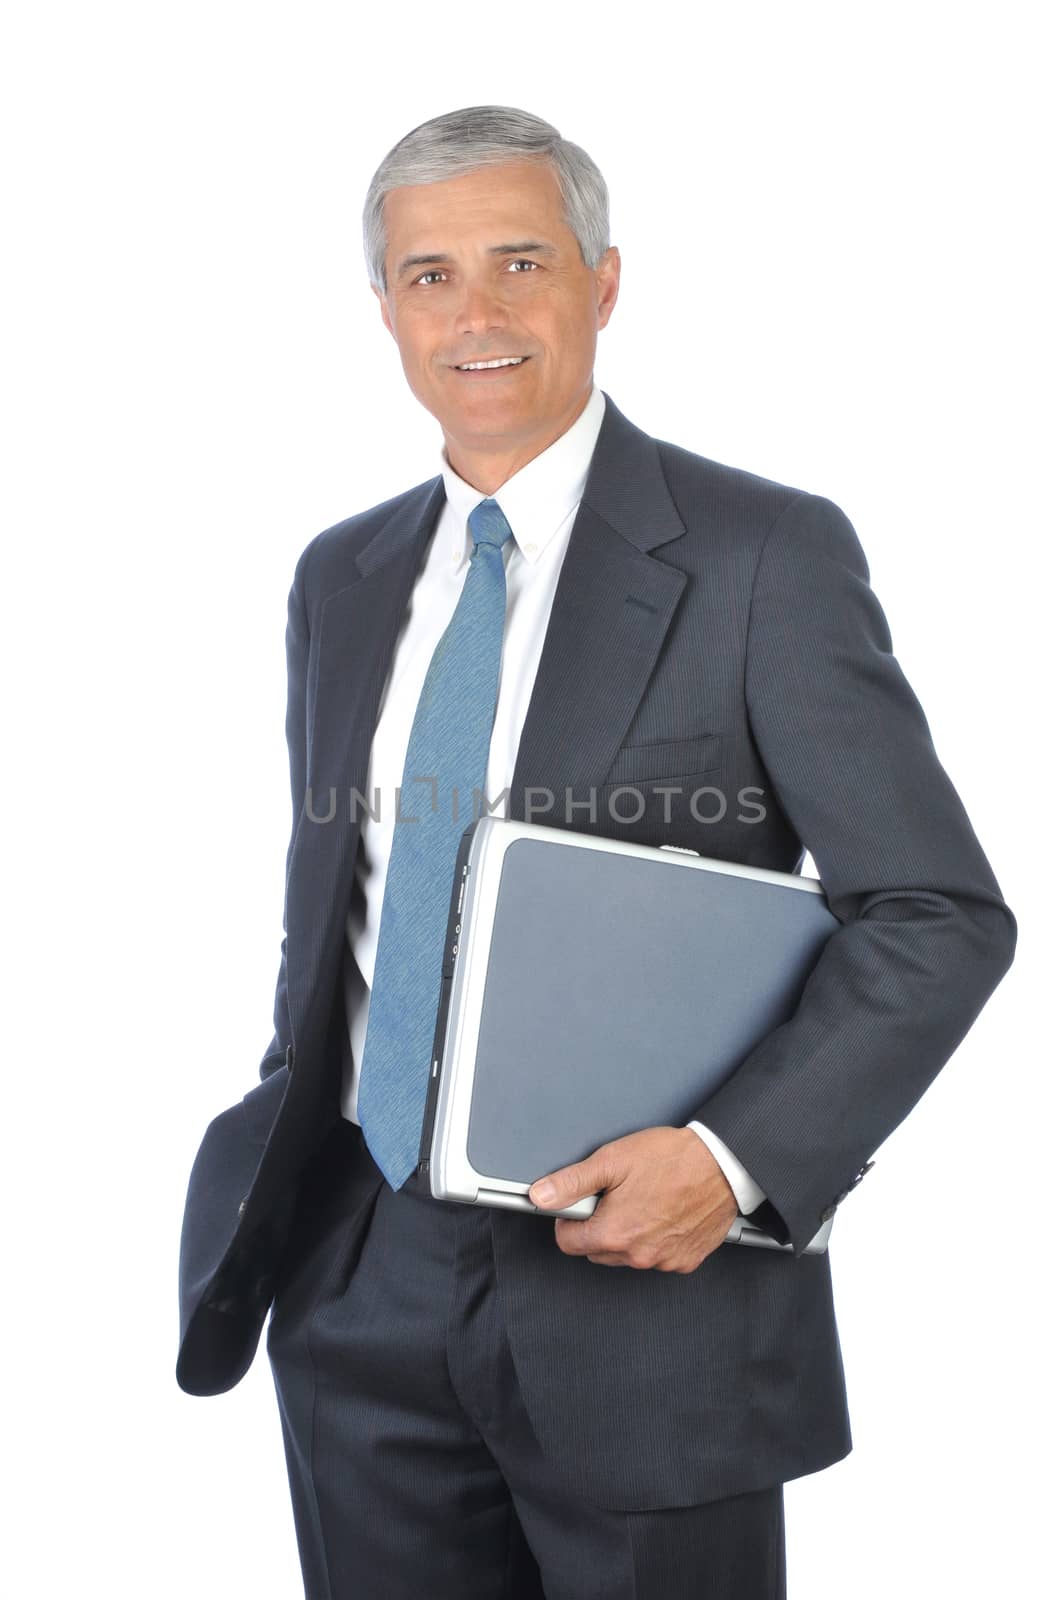 Smiling Businessman Holding Laptop Computer Under His Arm isolaed on white